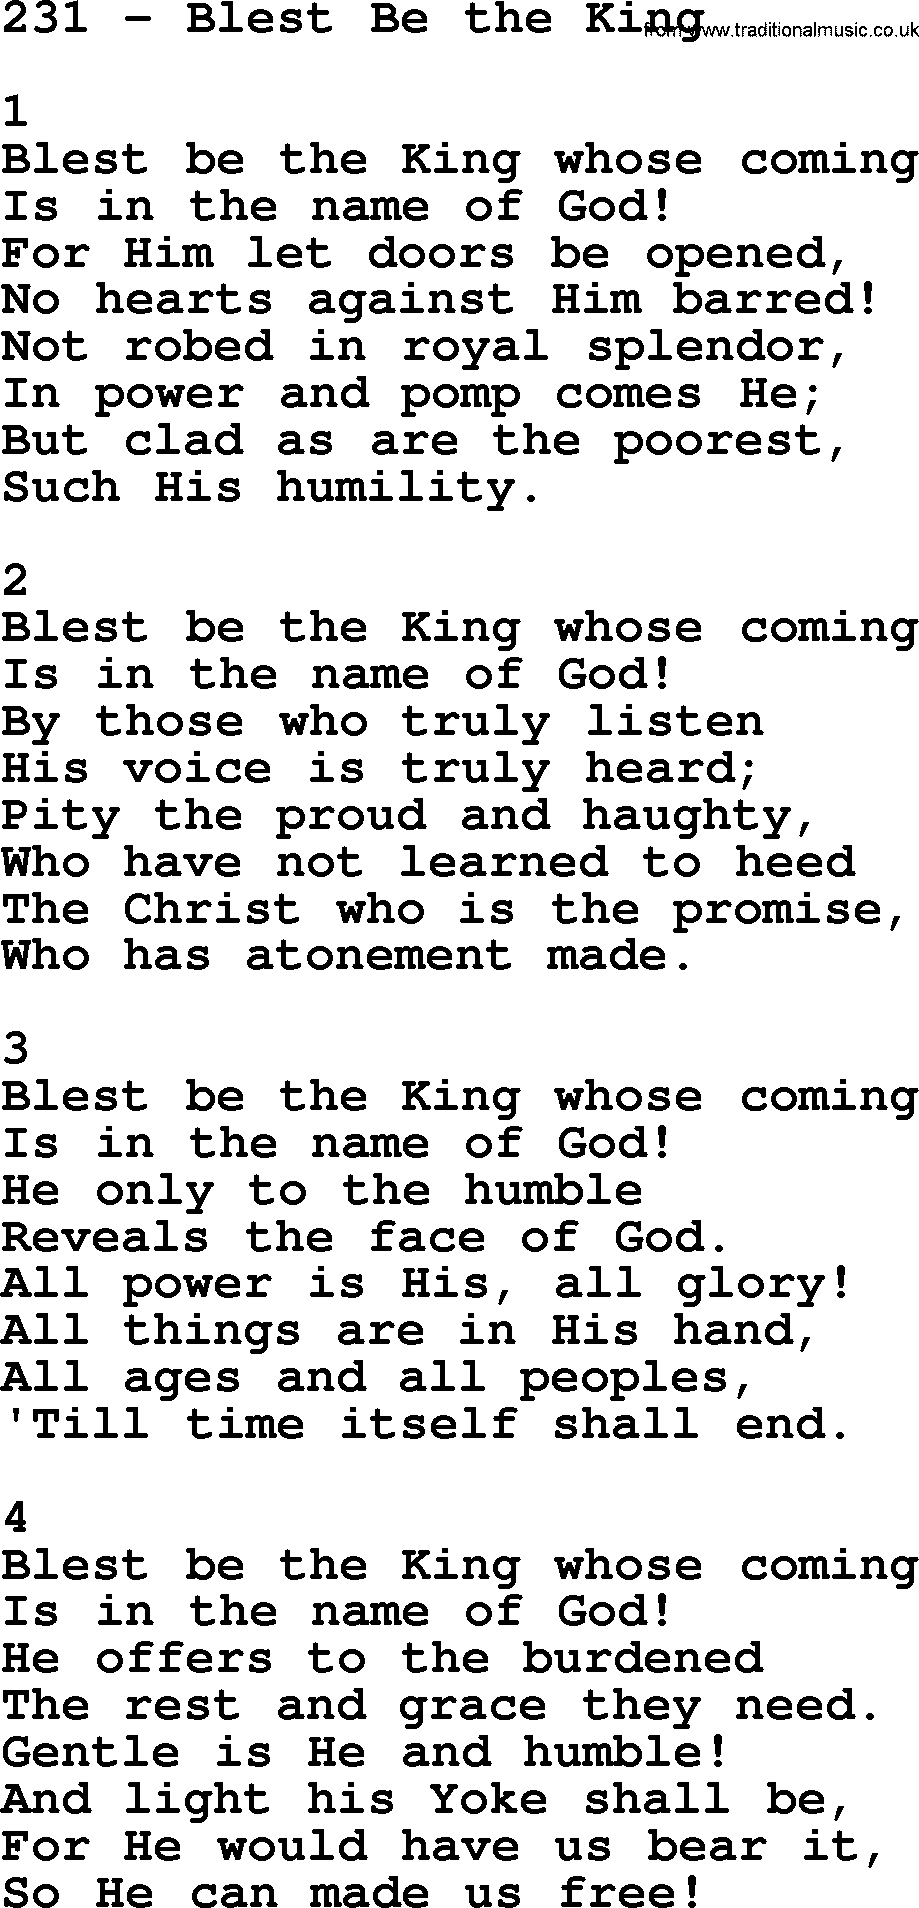 Complete Adventis Hymnal, title: 231-Blest Be The King, with lyrics, midi, mp3, powerpoints(PPT) and PDF,